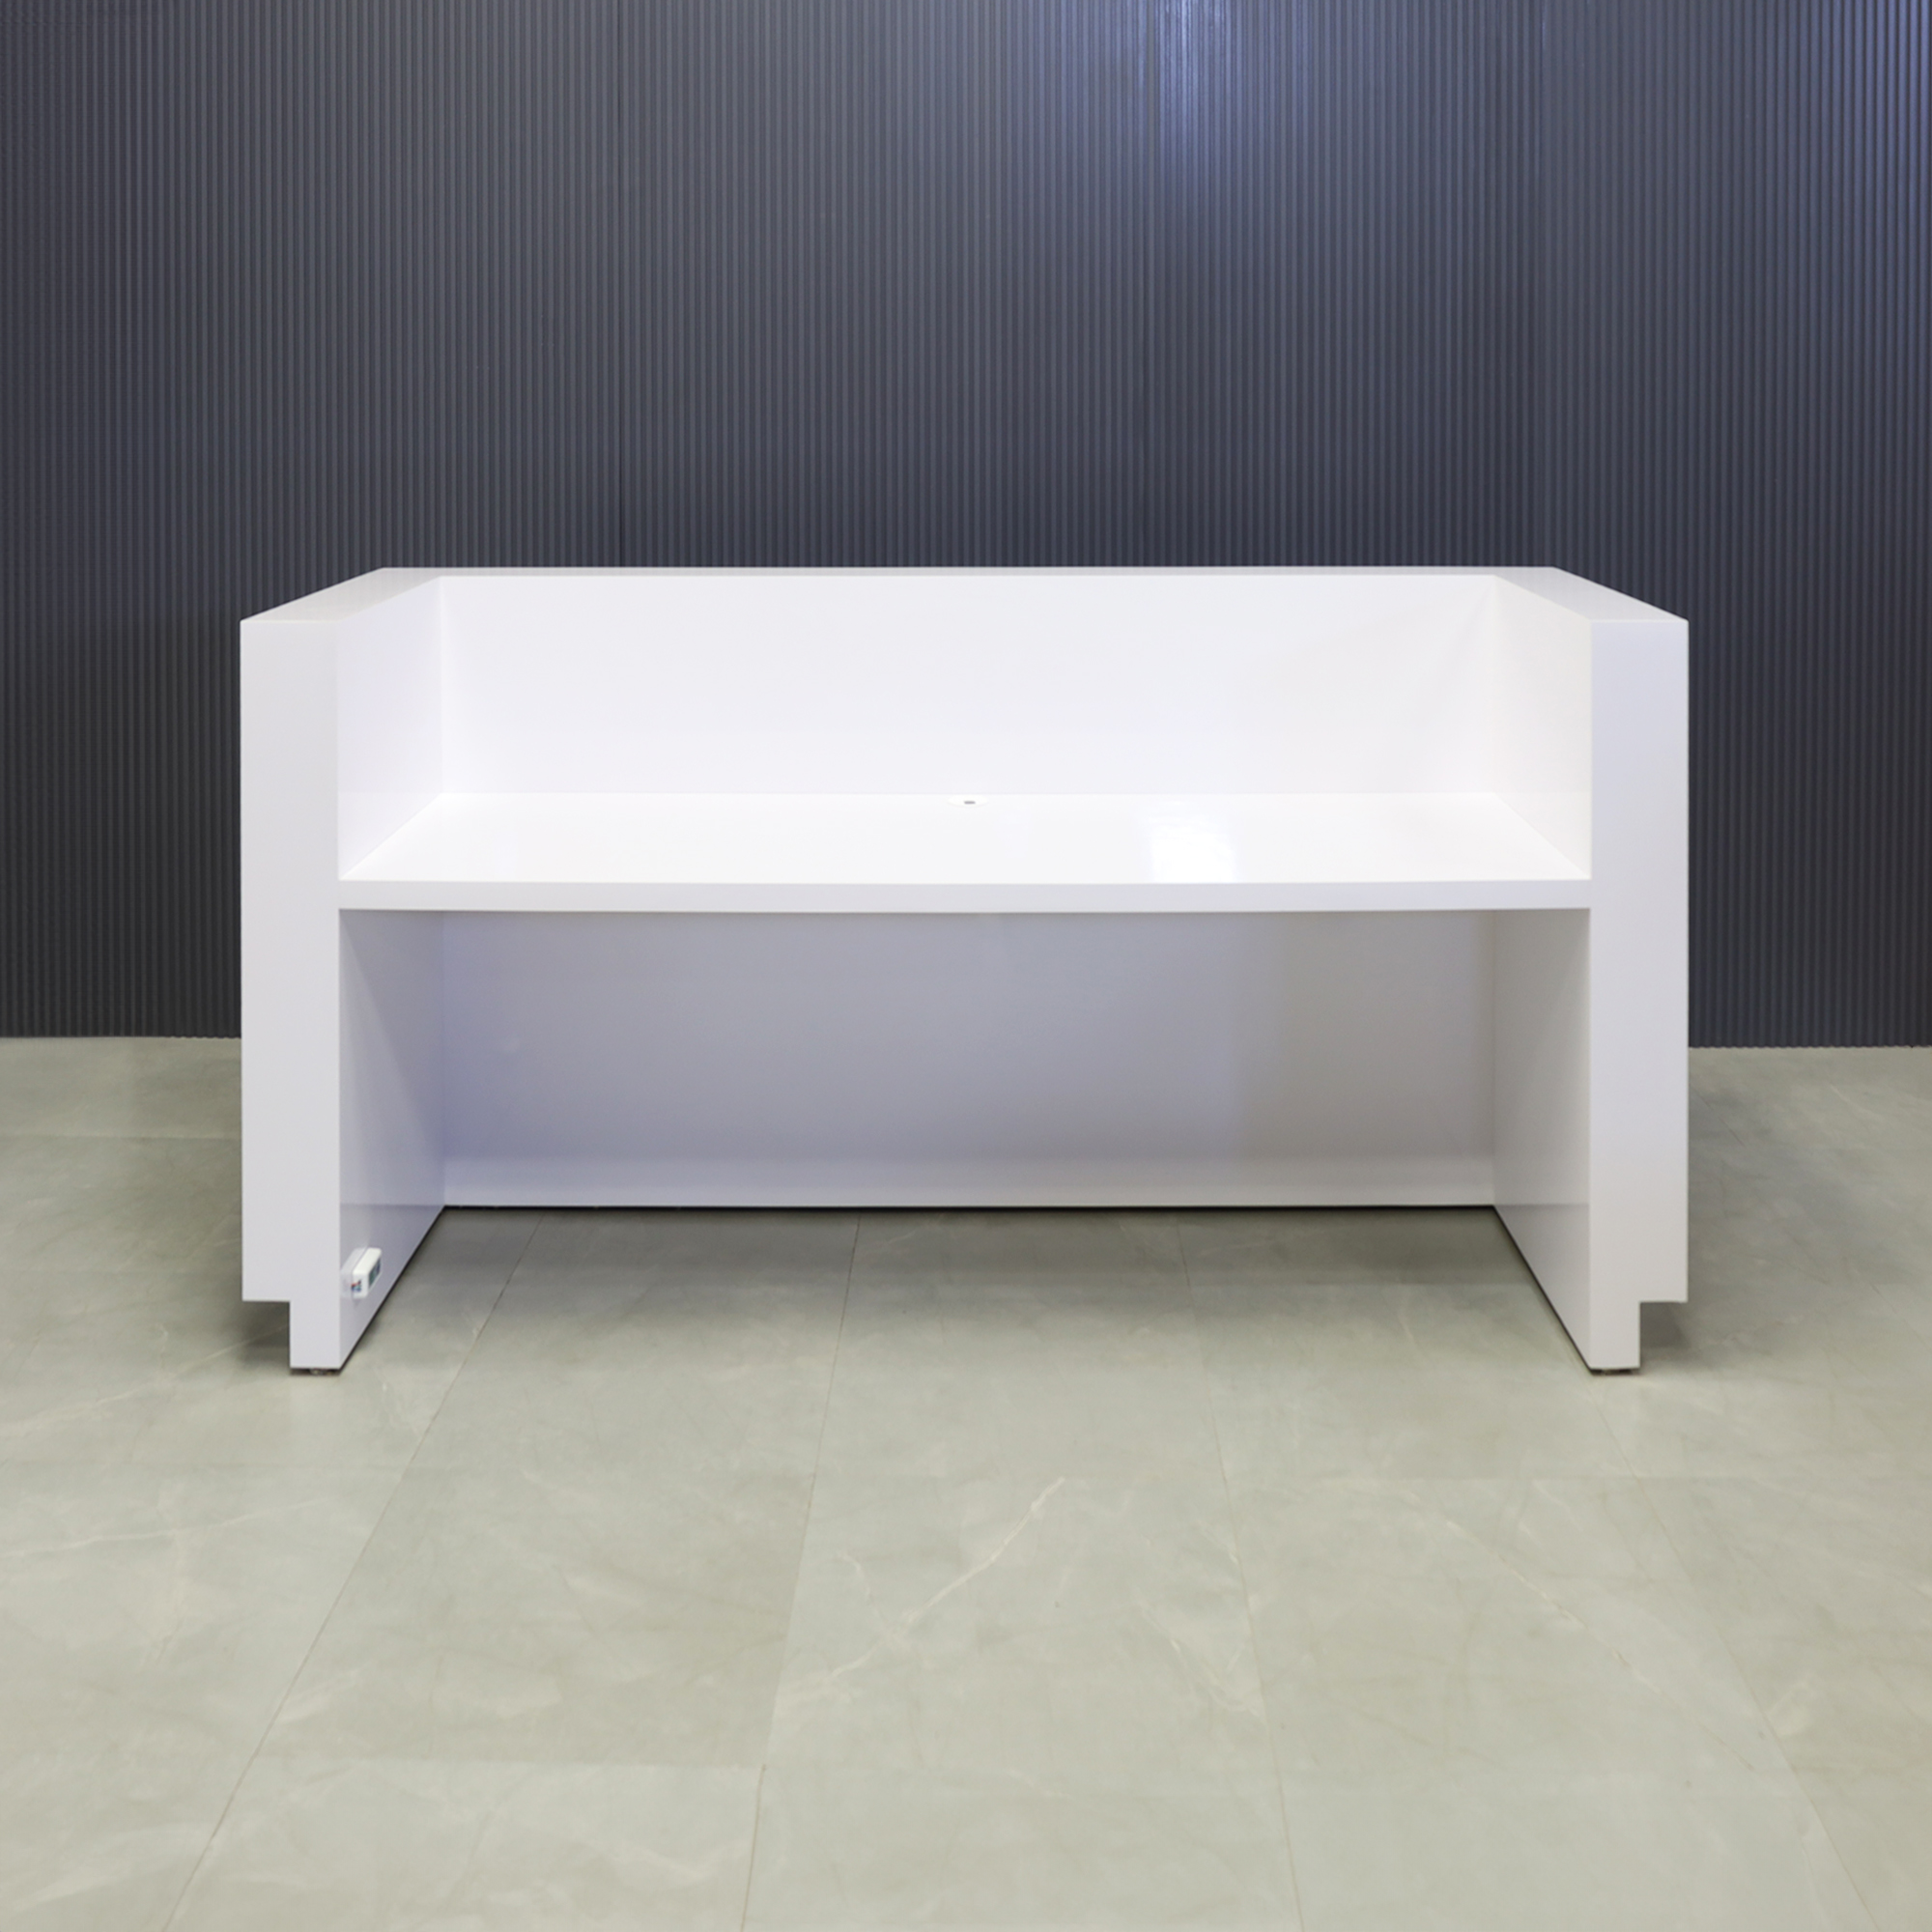 90 inches Dallas U-Shape Reception Desk in White Gloss laminate desk and brushed aluminum toe-kick, with multi-colored LED, seating side view shown here.